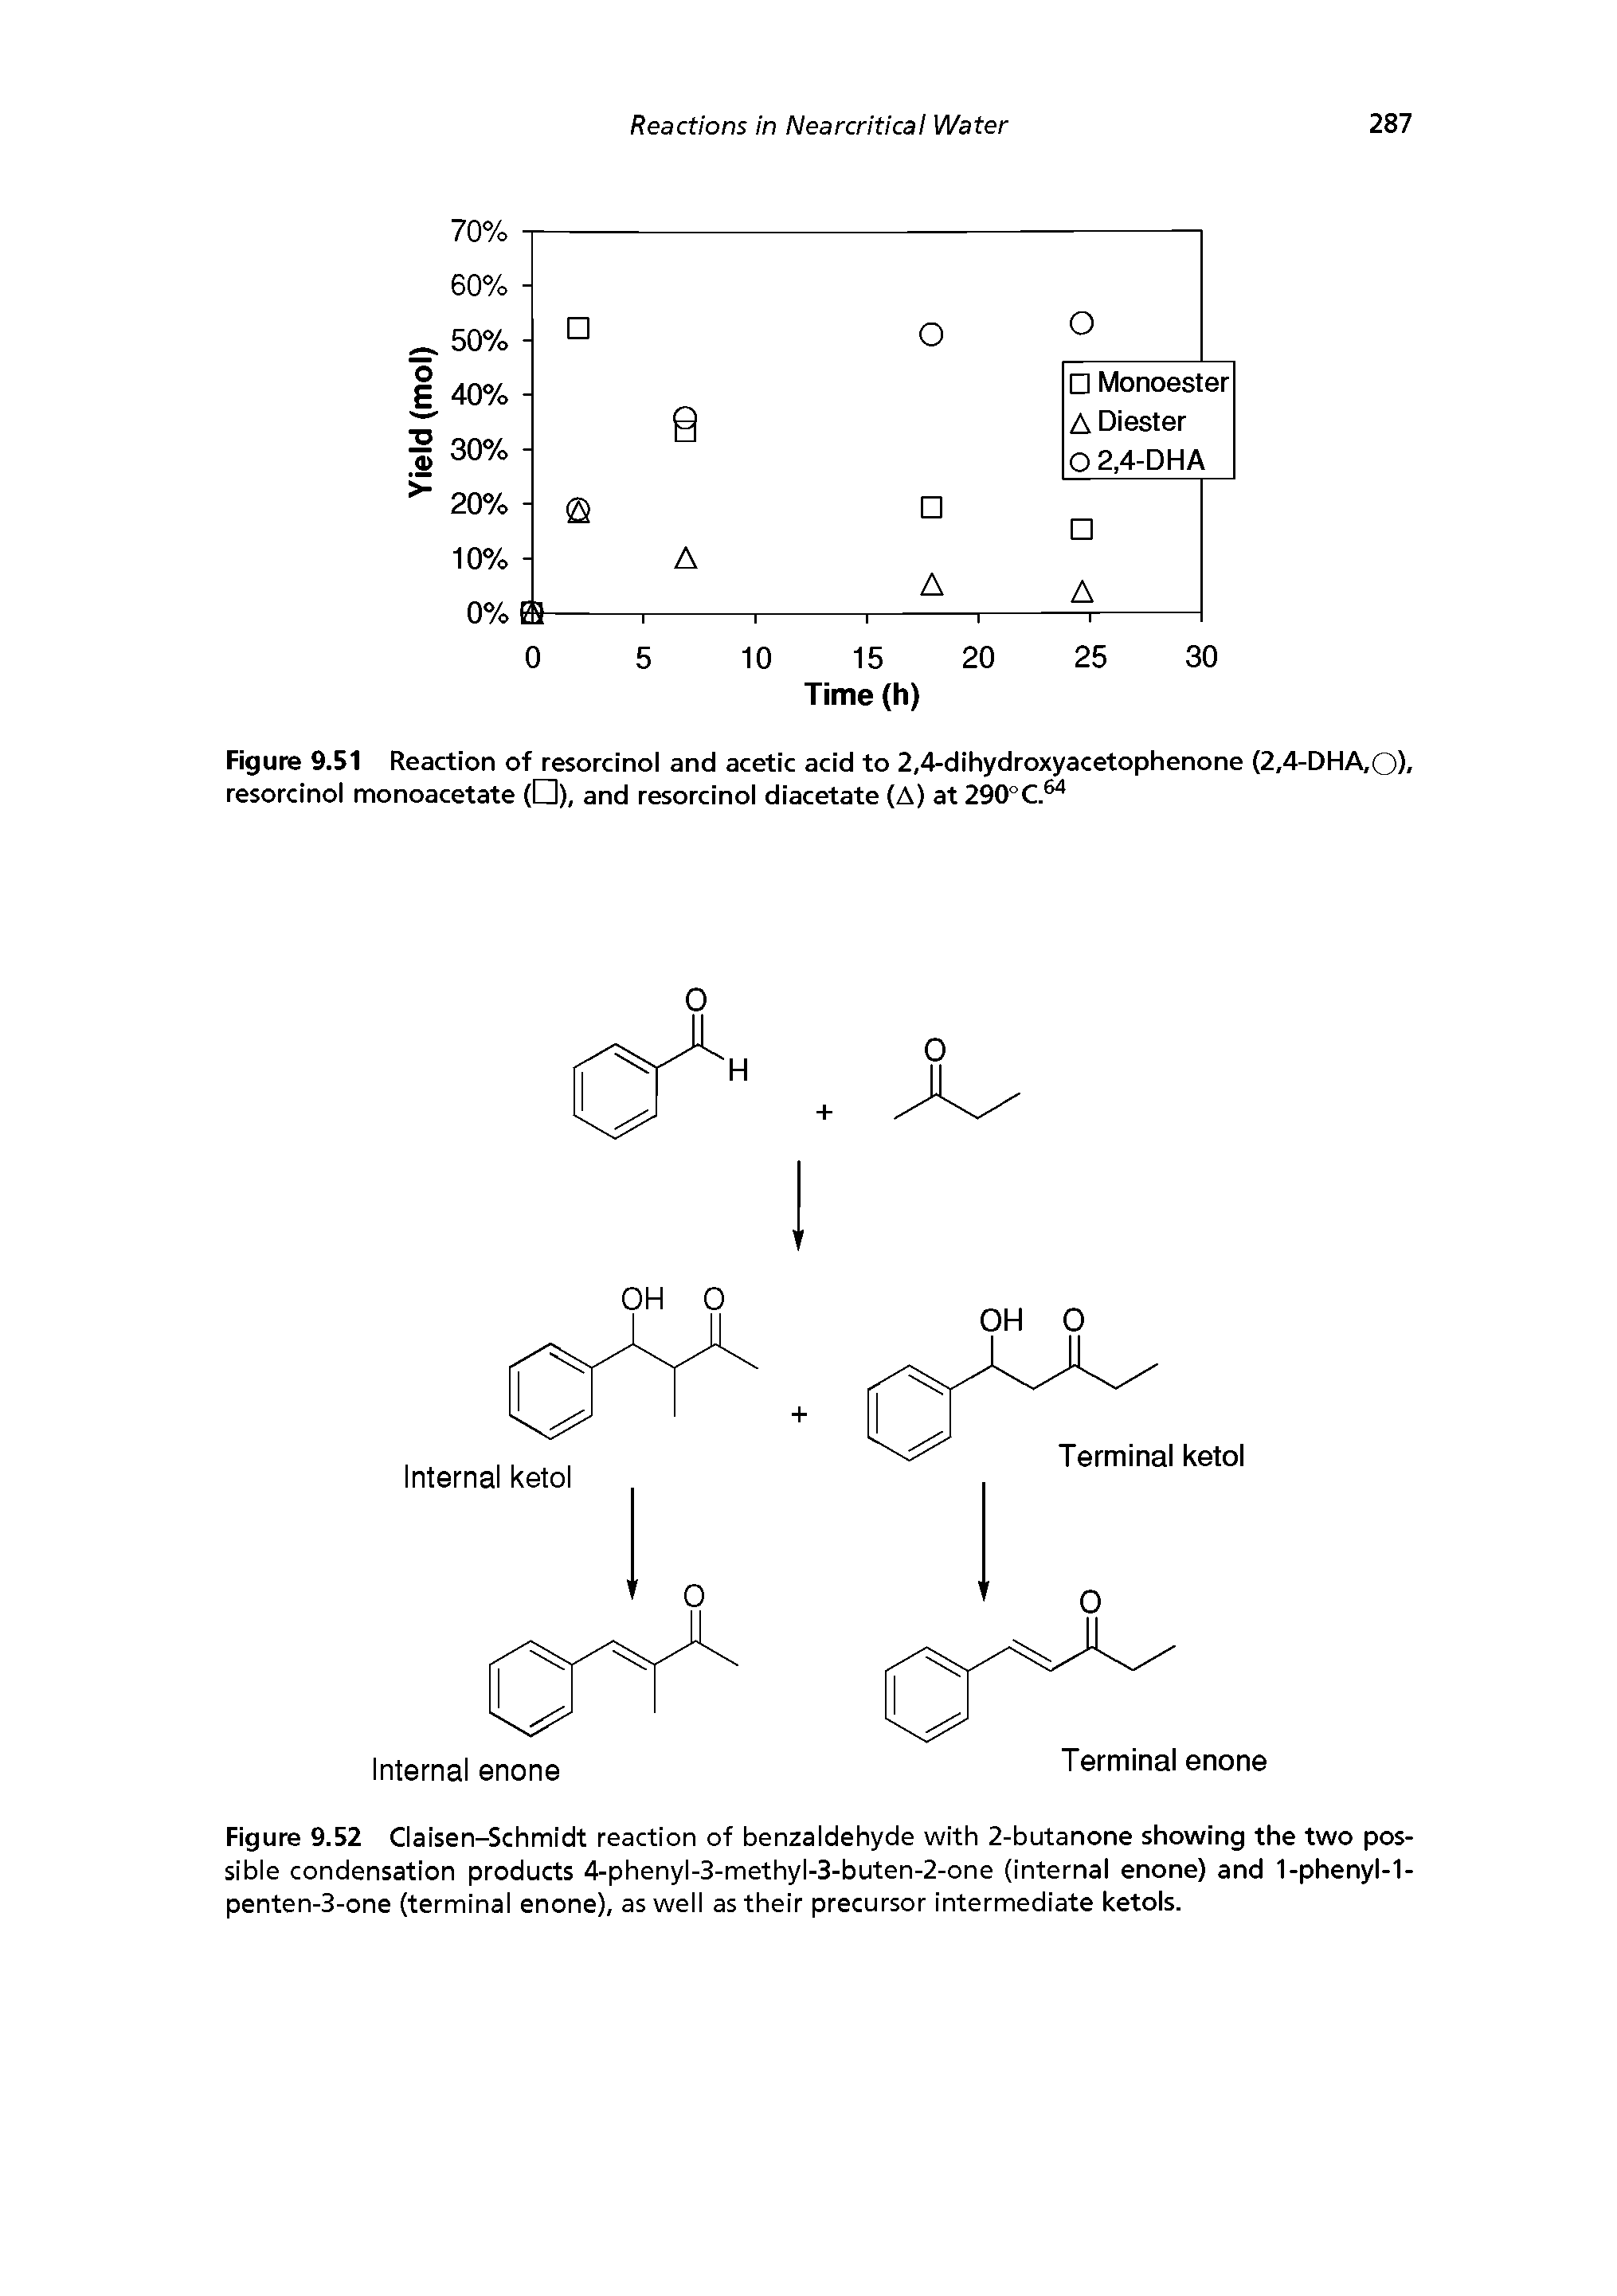 Figure 9.51 Reaction of resorcinol and acetic acid to 2,4-dihydroxyacetophenone (2,4-DHA,0). resorcinol monoacetate ( ), and resorcinol diacetate (A) at 290°C. ...